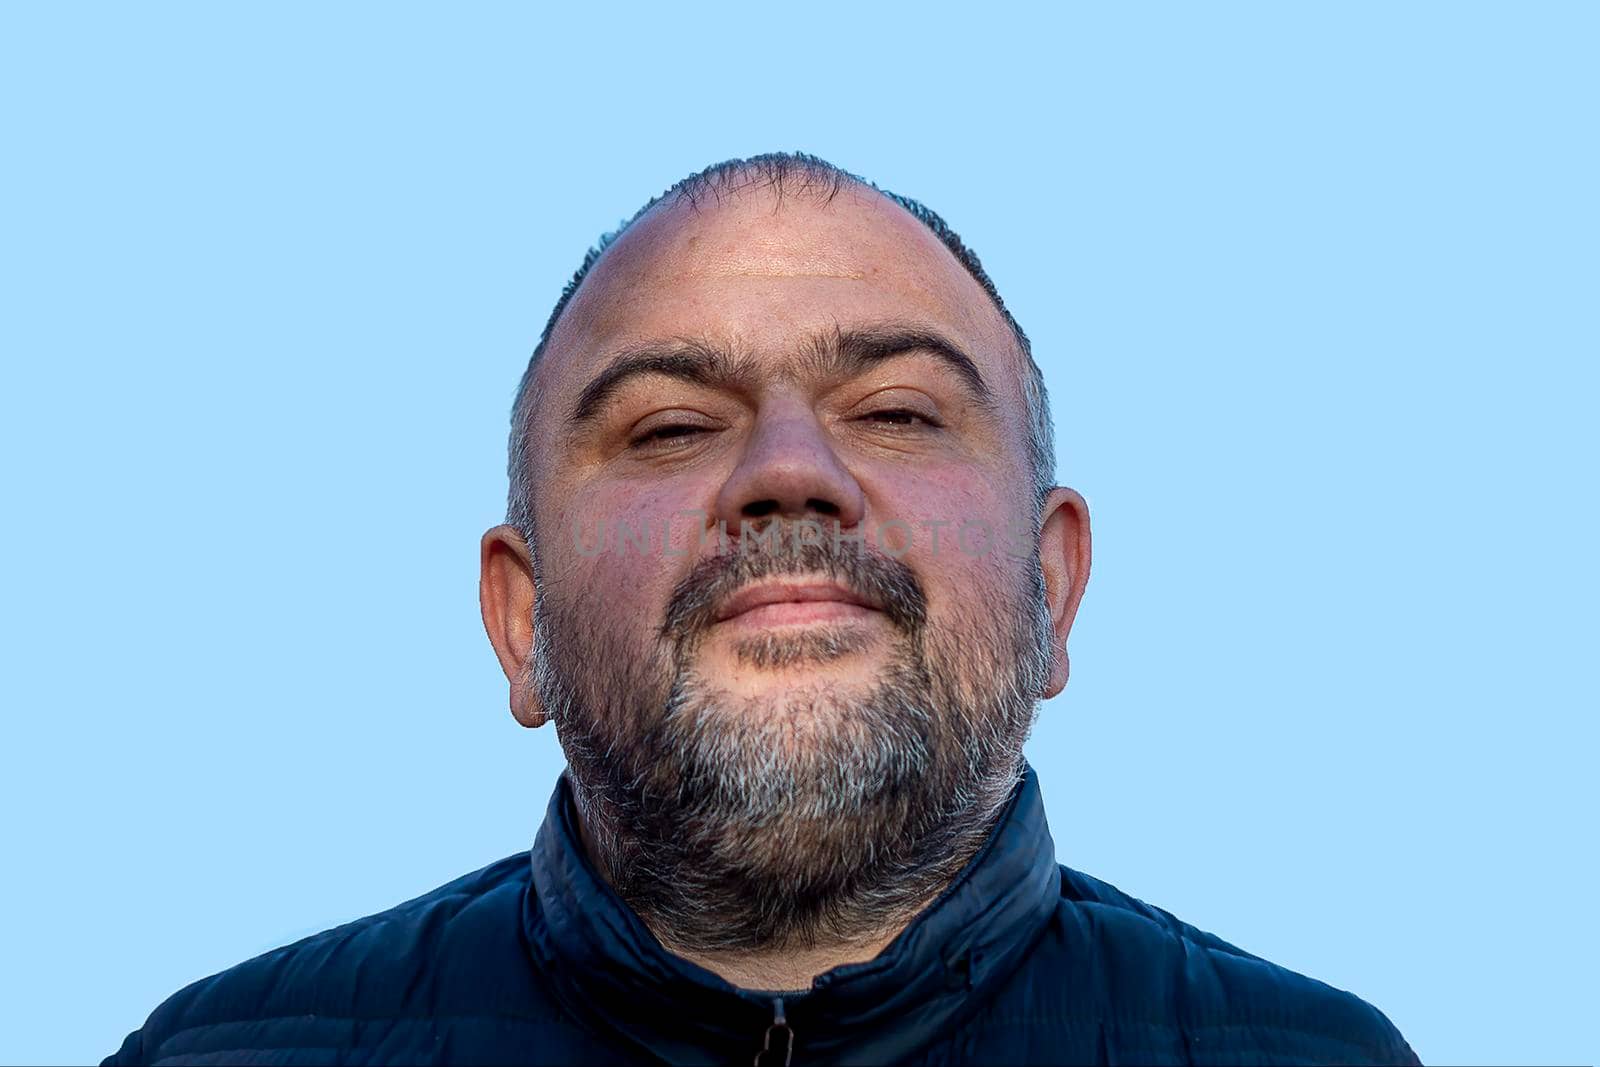 A man of 40 years with a beard on blue background. portrait. Copy space. by Essffes